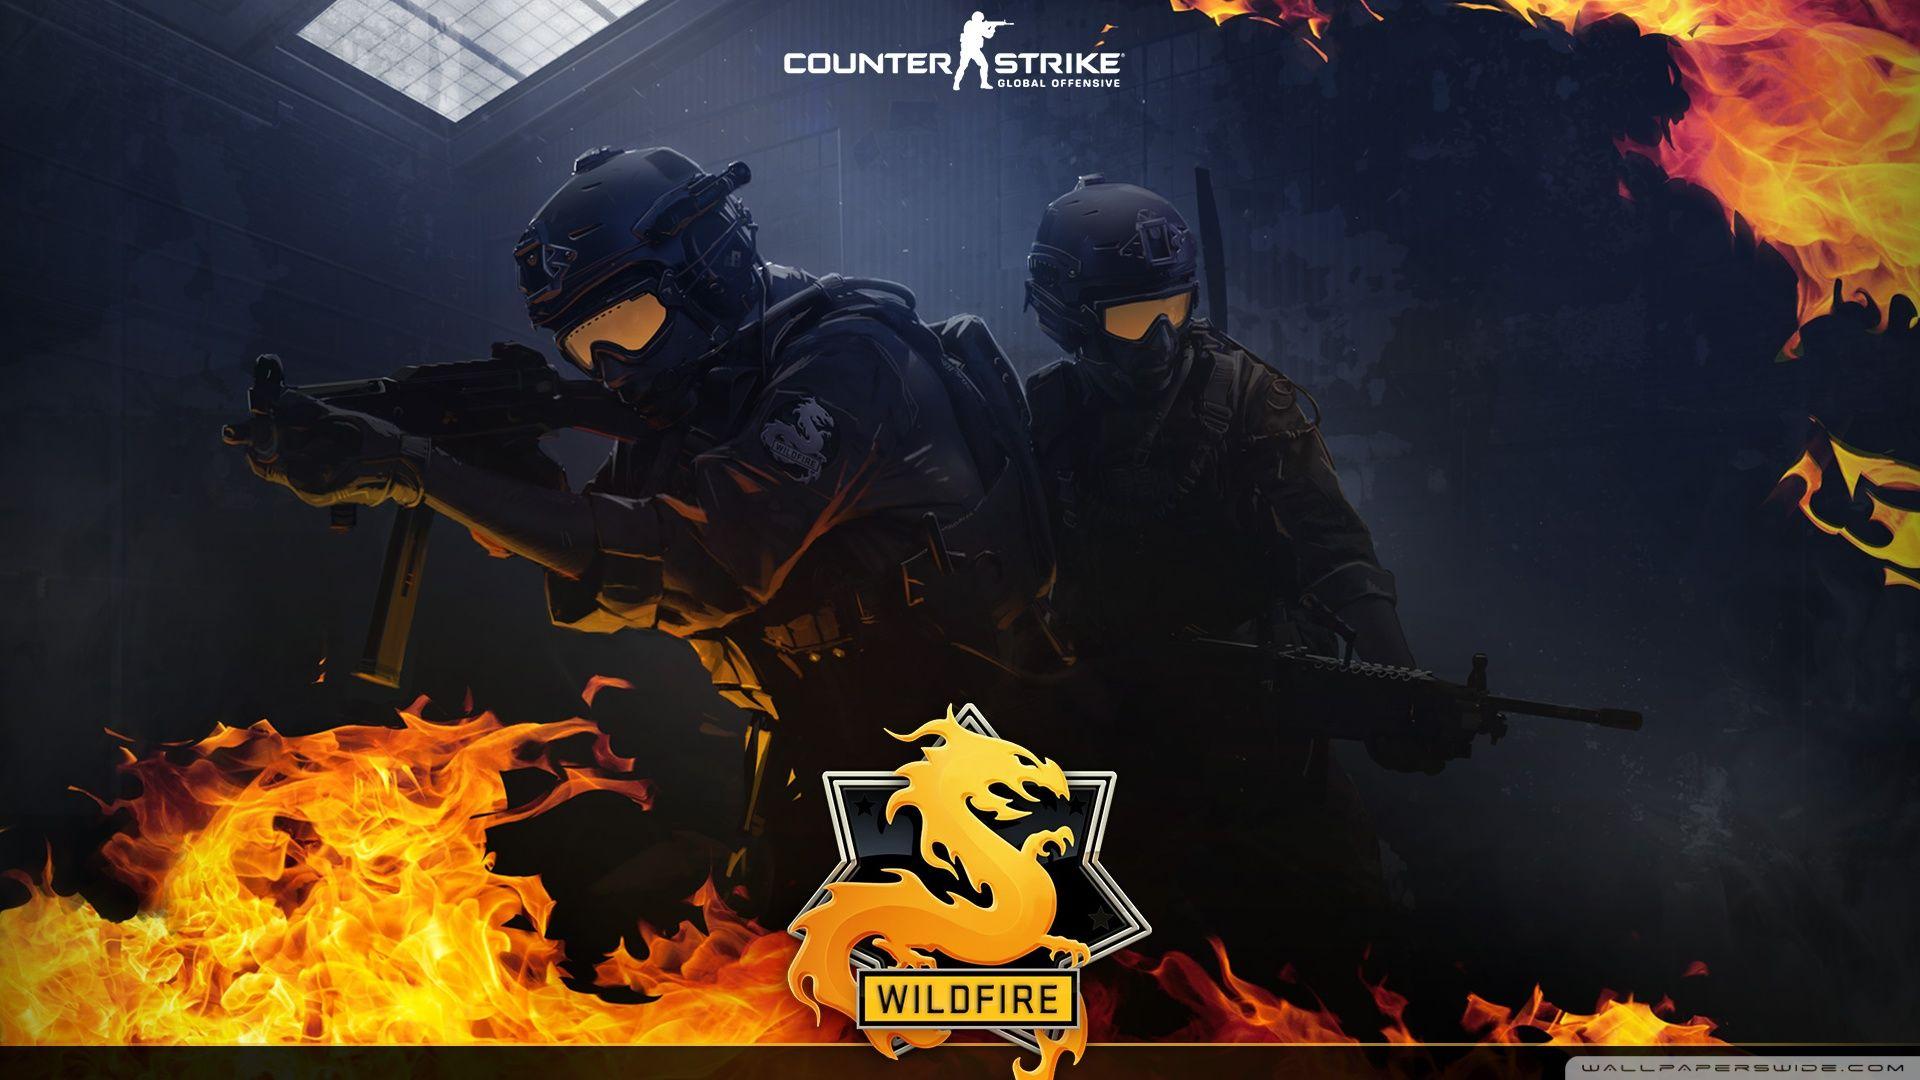 Counter Strike Global Offensive Wallpapers - Top Free ...